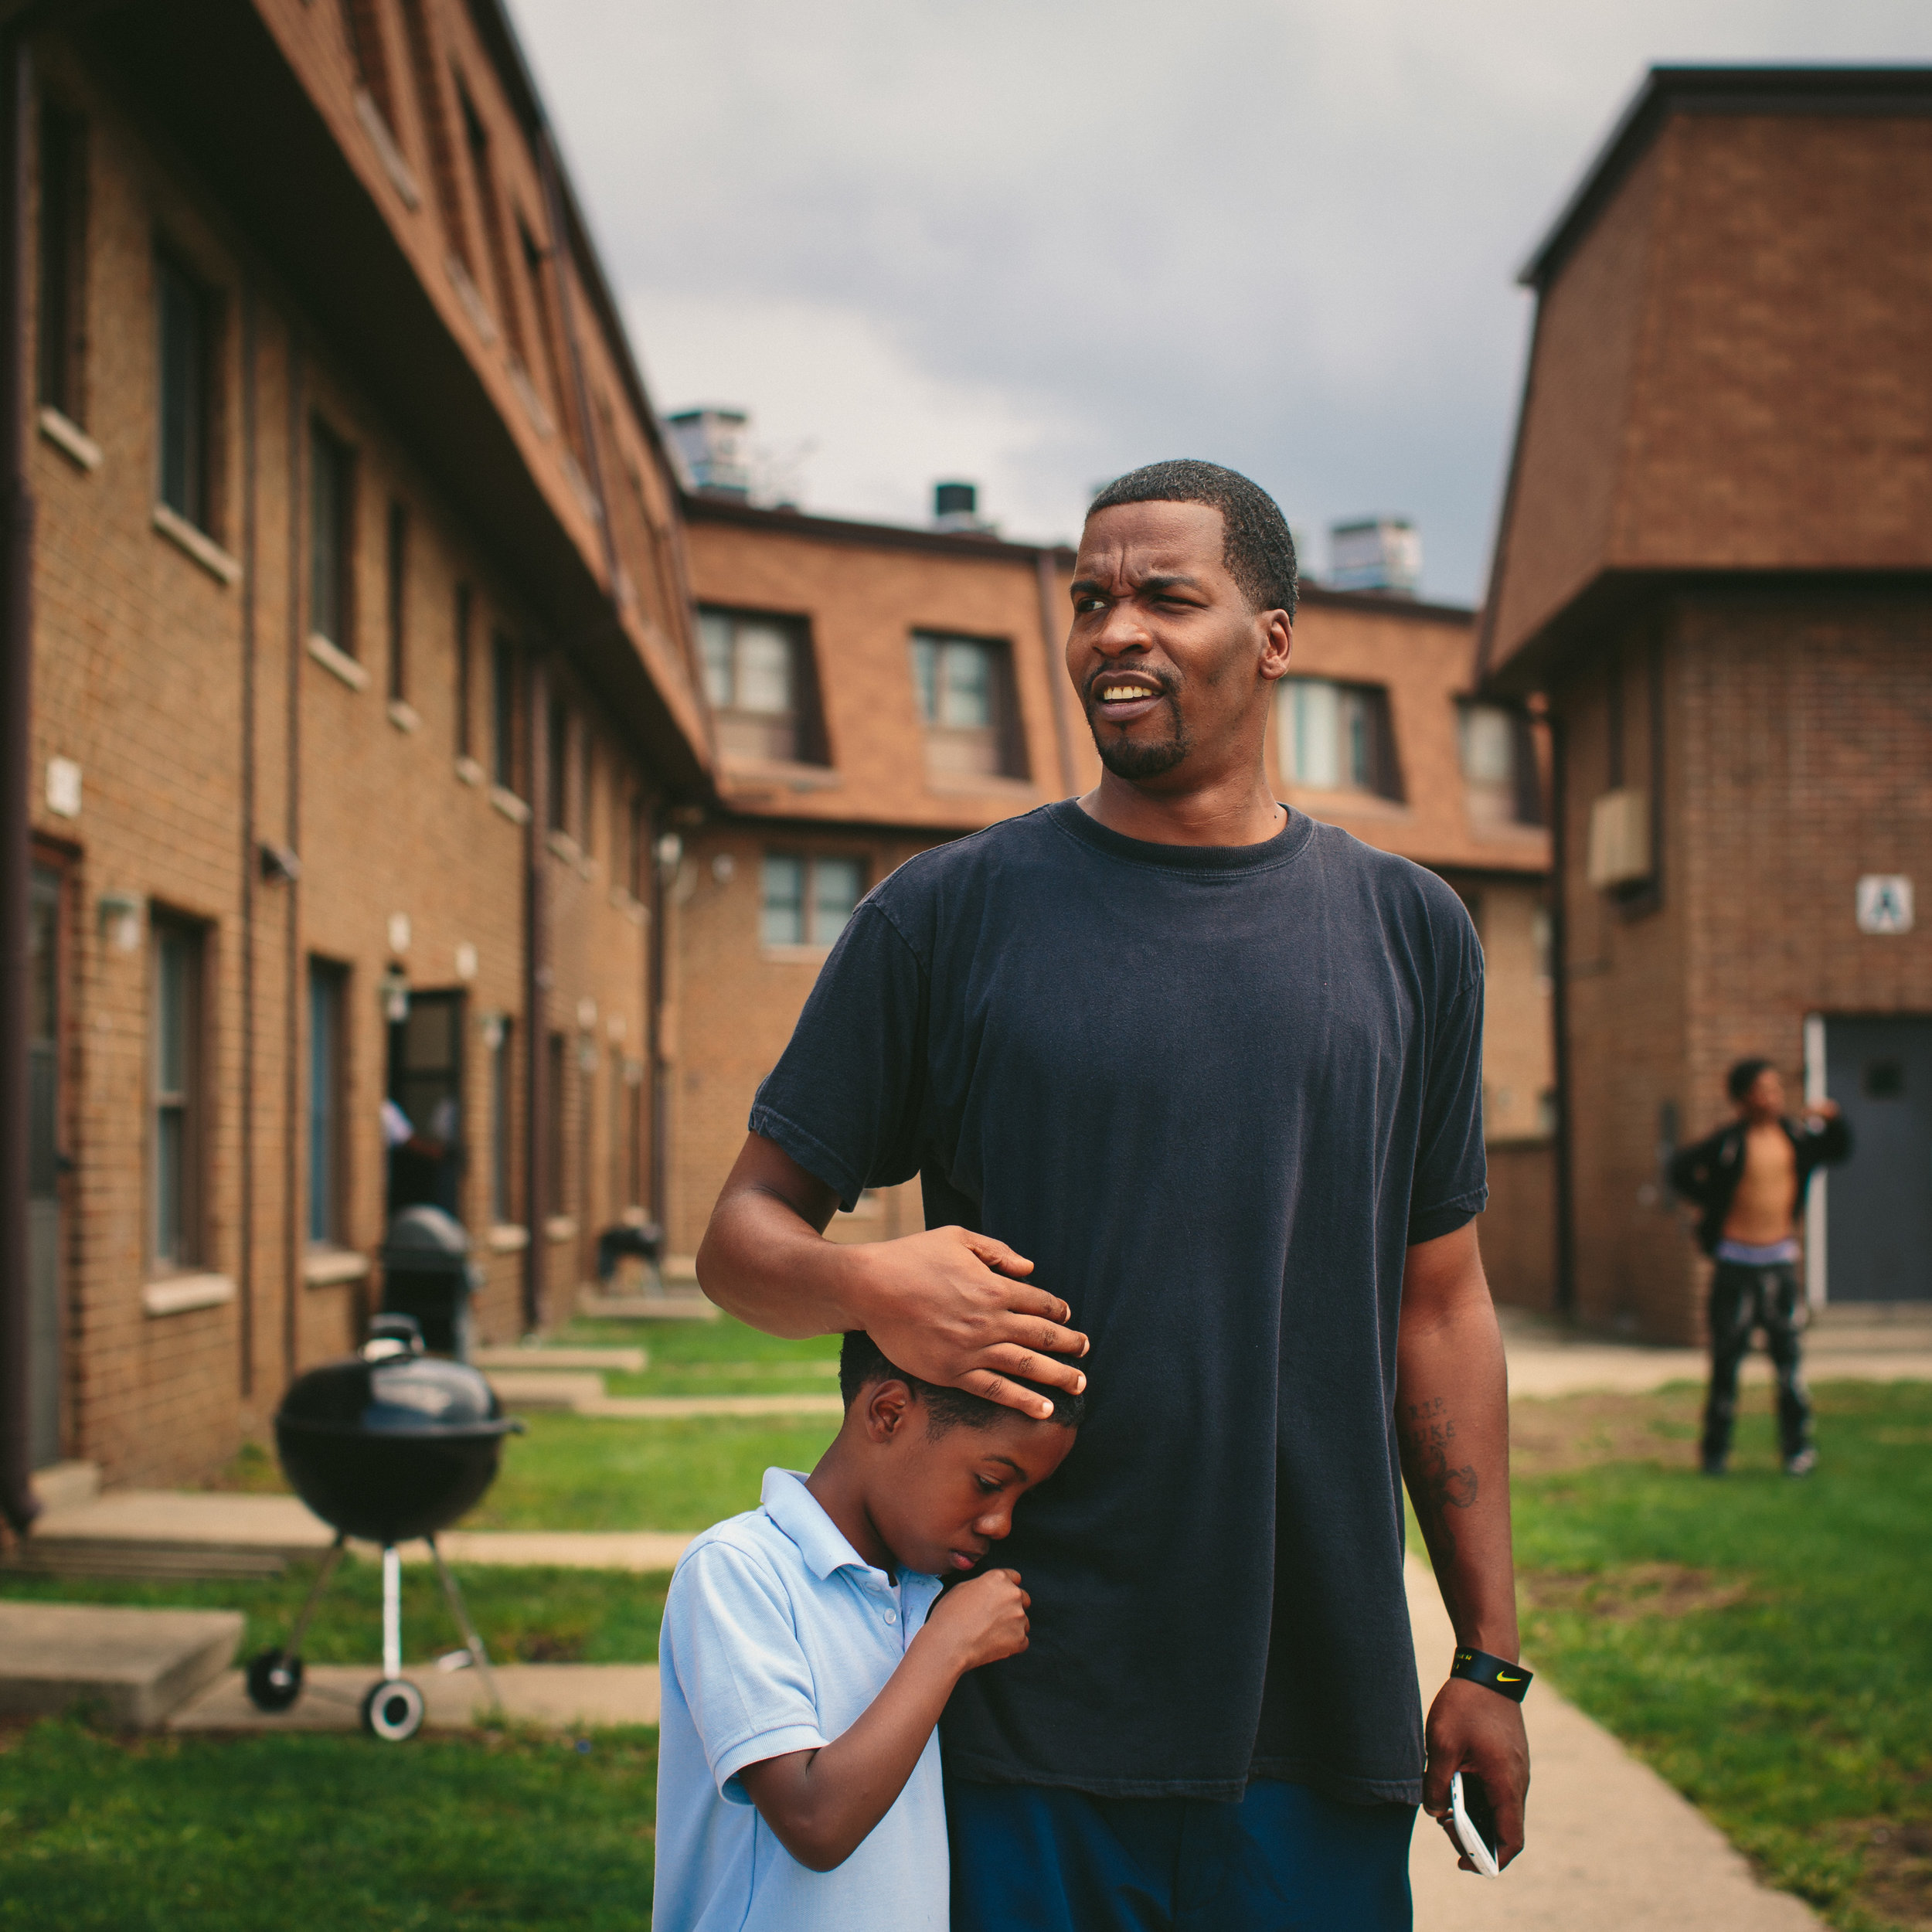   Lamont Anderson embraces his son Lamont Anderson Jr., 8, at the West Calumet Housing Complex. Anderson Jr.’s blood lead levels test results were above the CDCs 5 mg/d threshold for action. After living in the complex for more than a decade, the fa